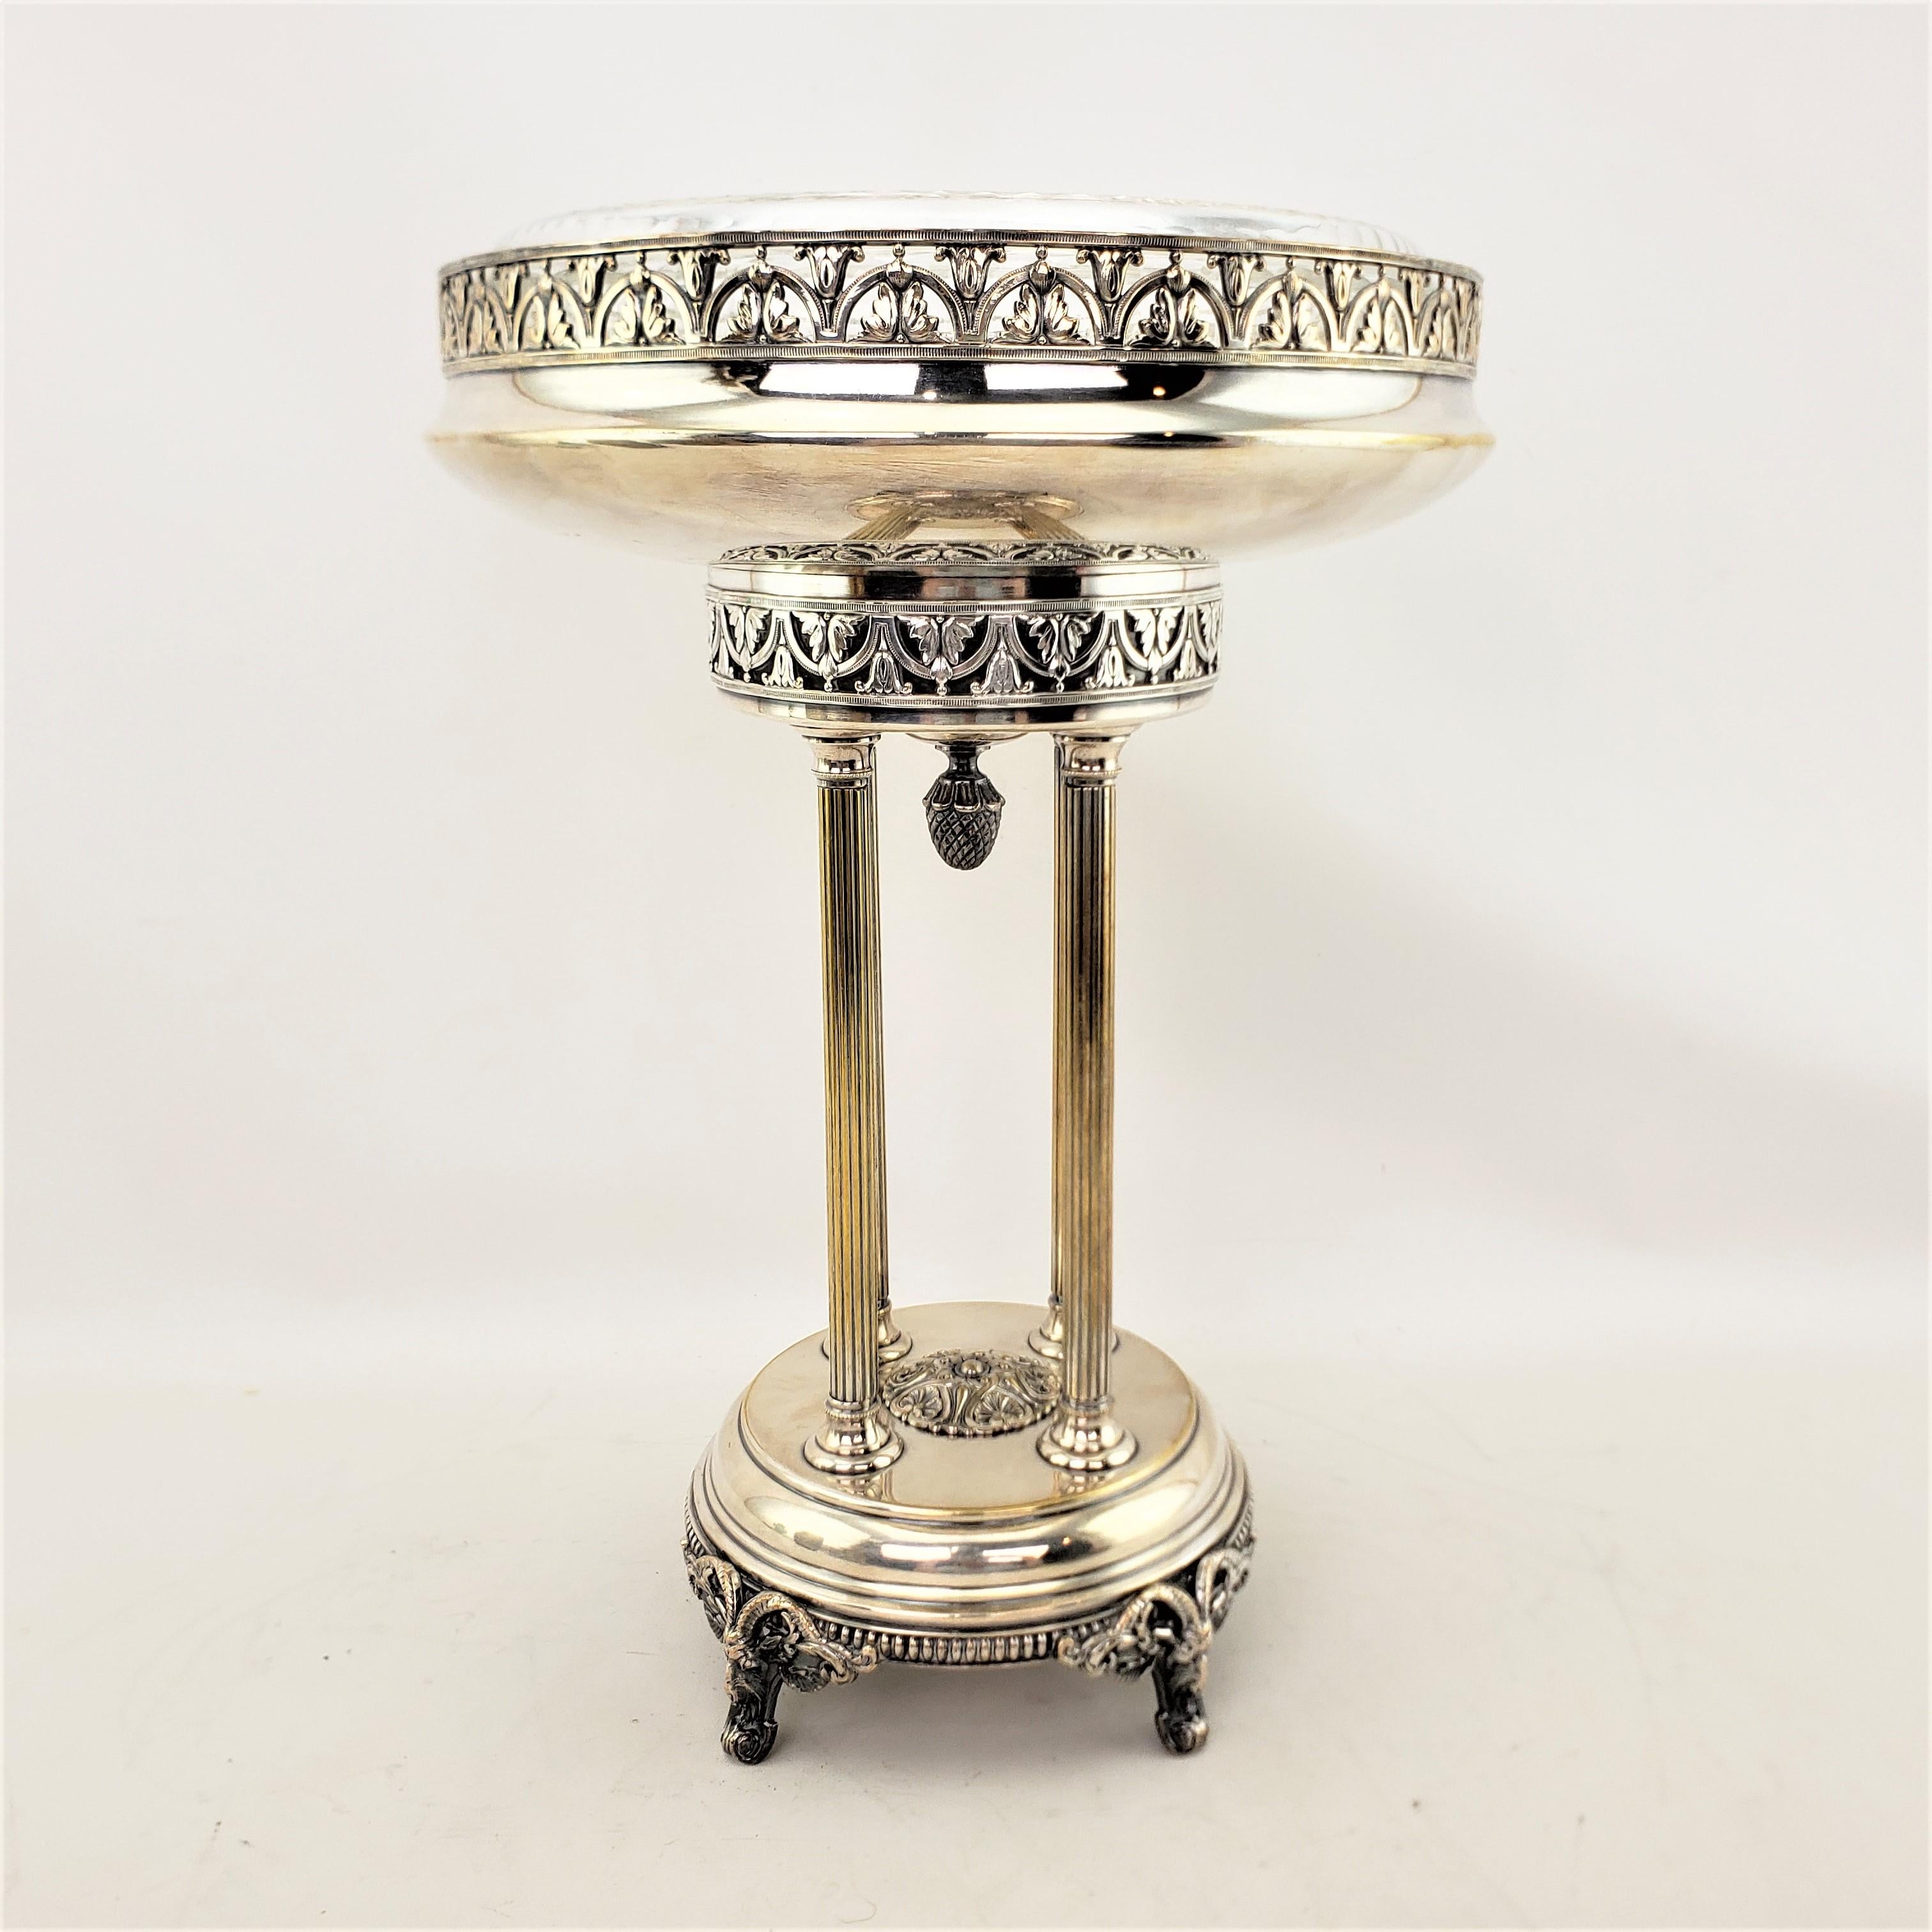 This antique silver plated centerpiece is signed and hallmarked by Phenix, amd presumed to originate from France and date to approximately 1920 and done in a Neoclassical Revival style. The top os the centerpiece consists of a round pierced gallery